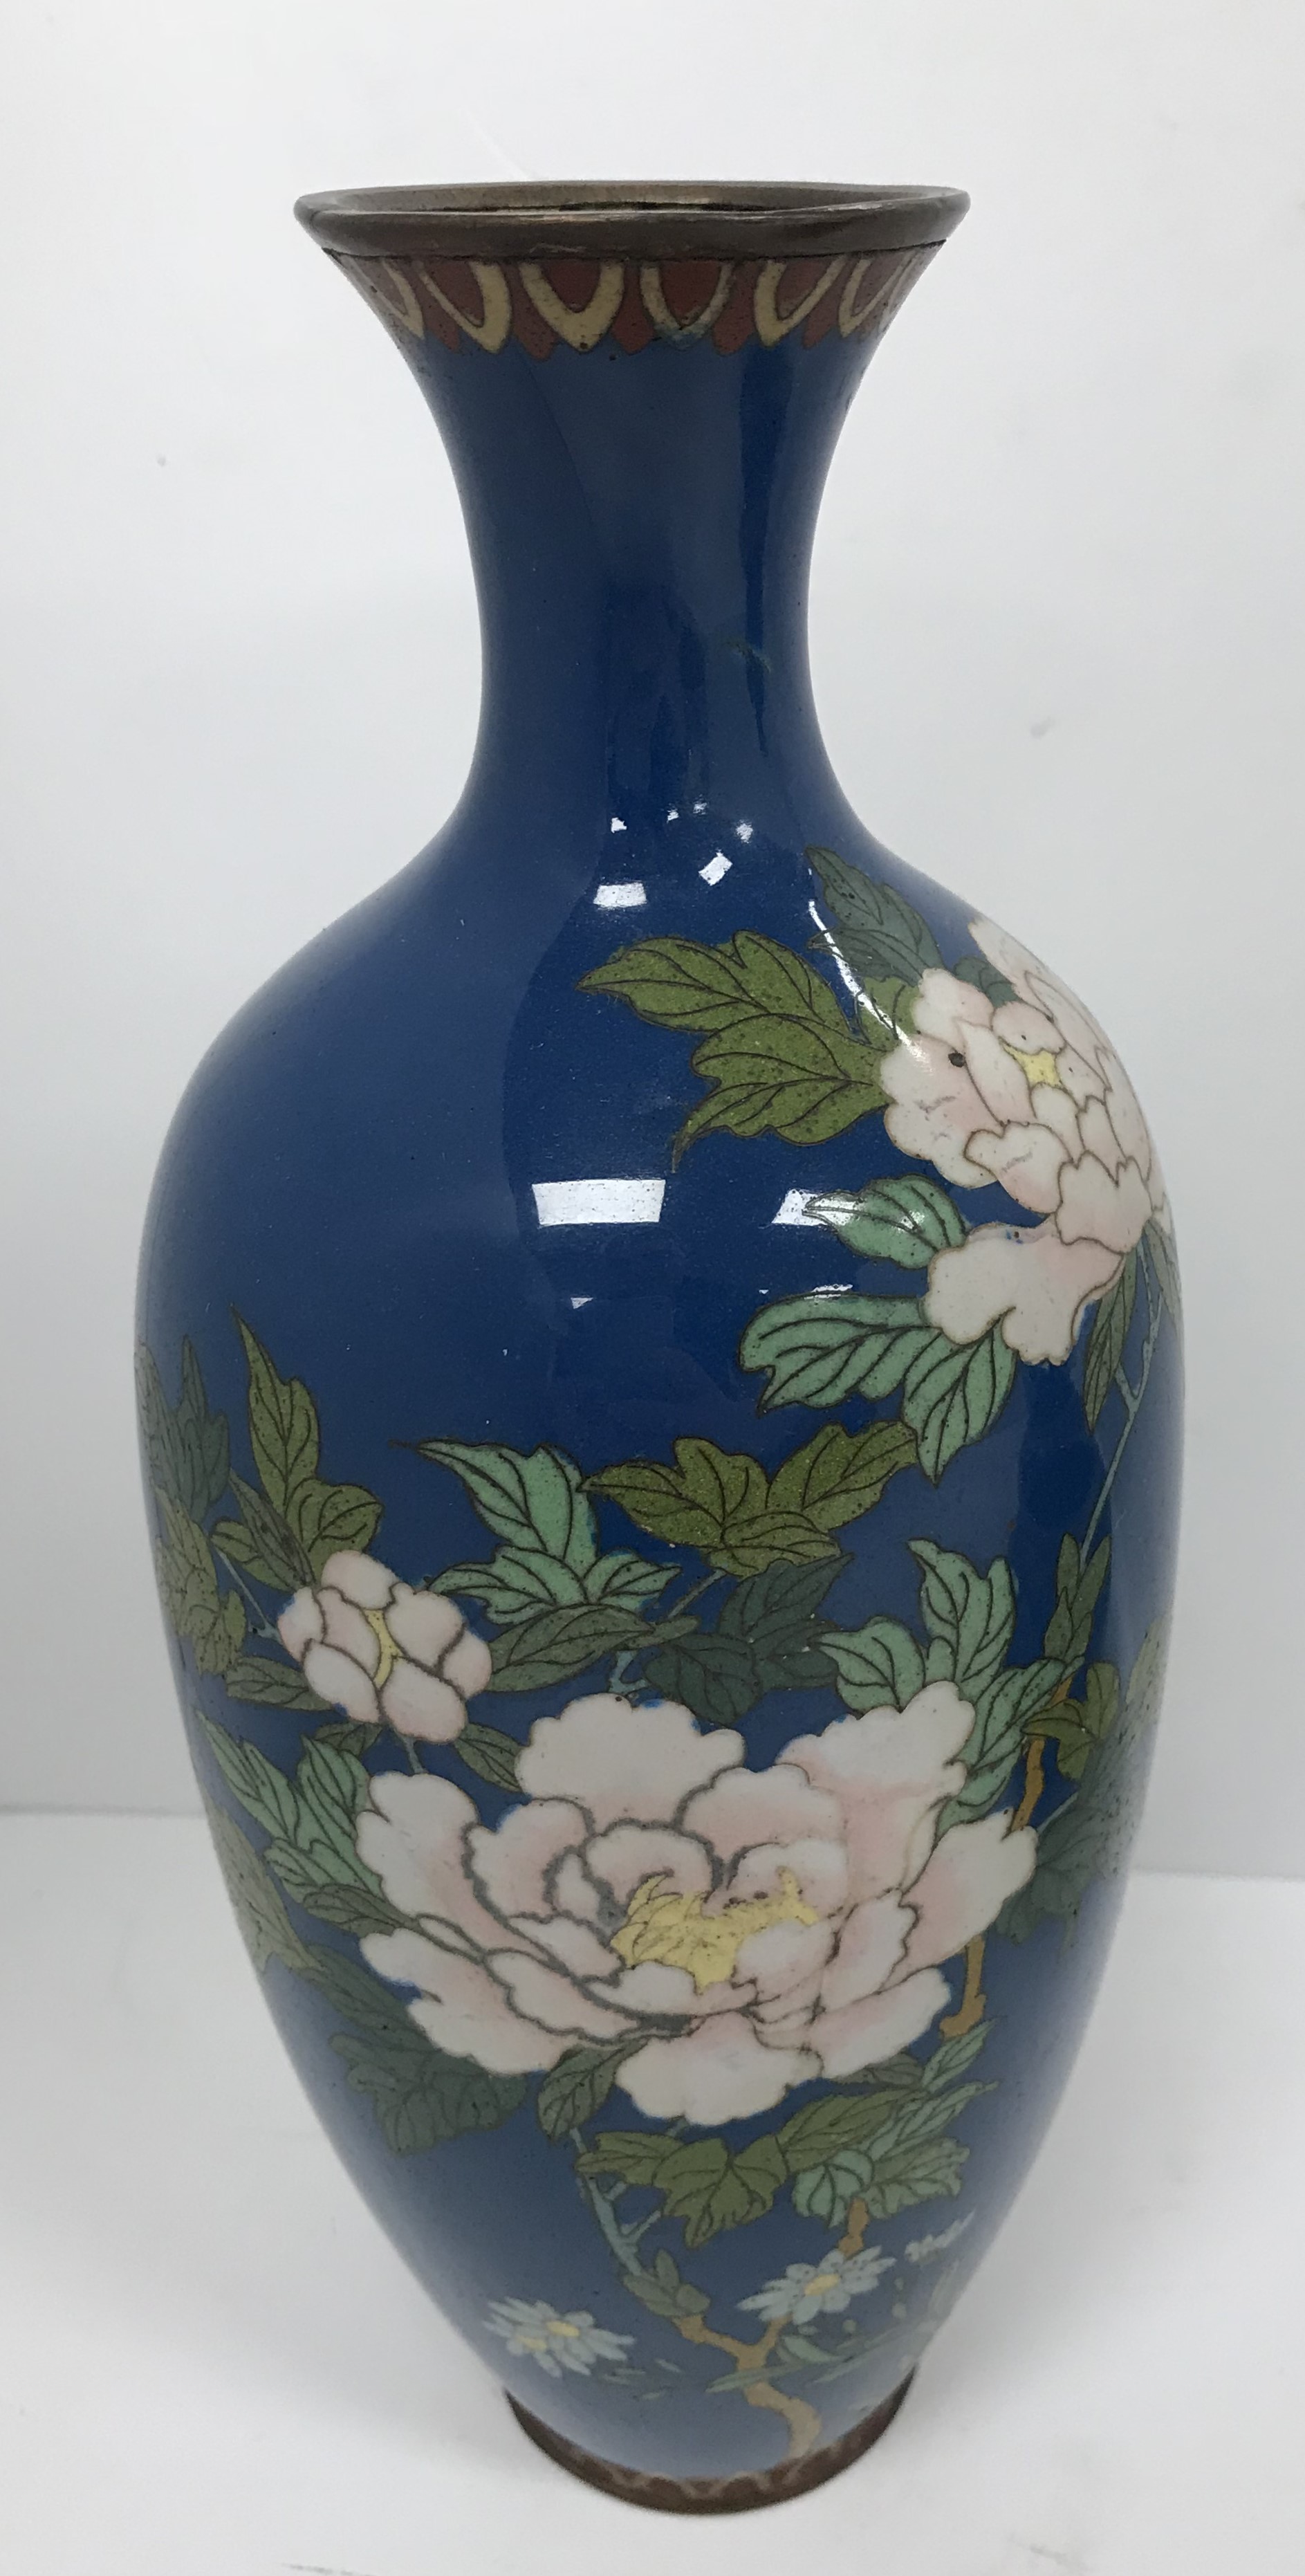 Two similar Chinese blue ground cloisonné vases with floral spray and blossom decoration, - Image 2 of 38